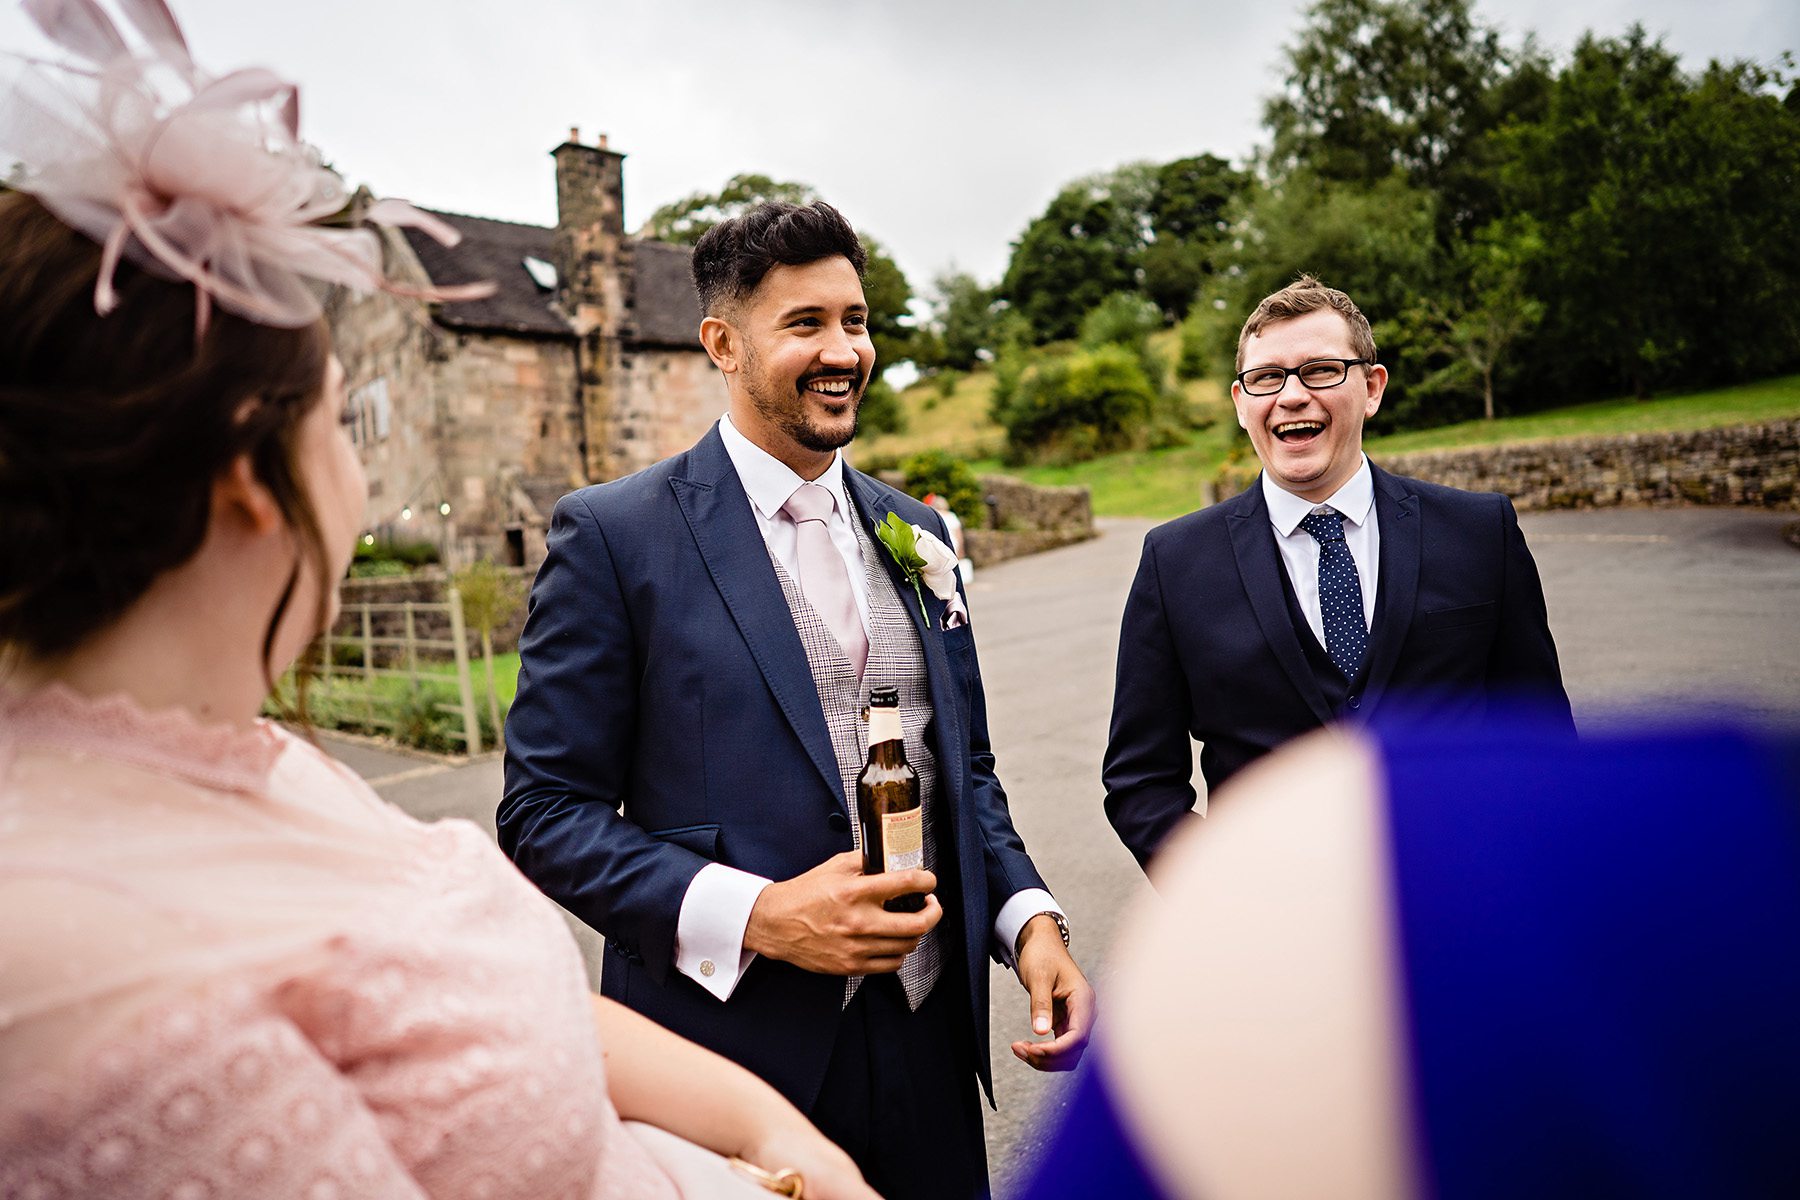 guests meeting the groom at the Ashes Barns